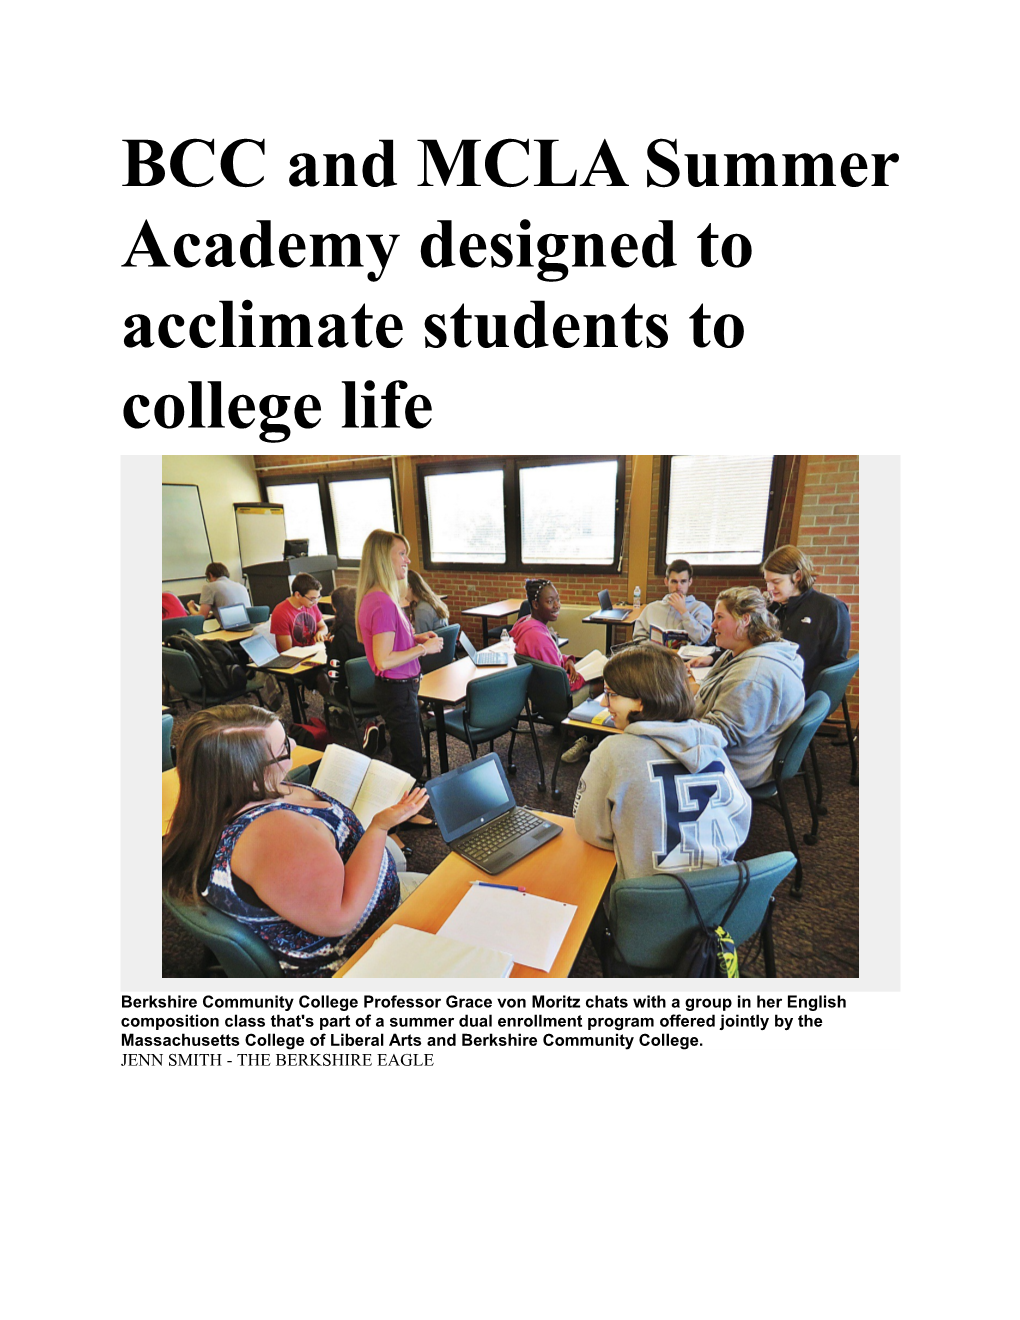 BCC and MCLA Summer Academy Designed to Acclimate Students to College Life